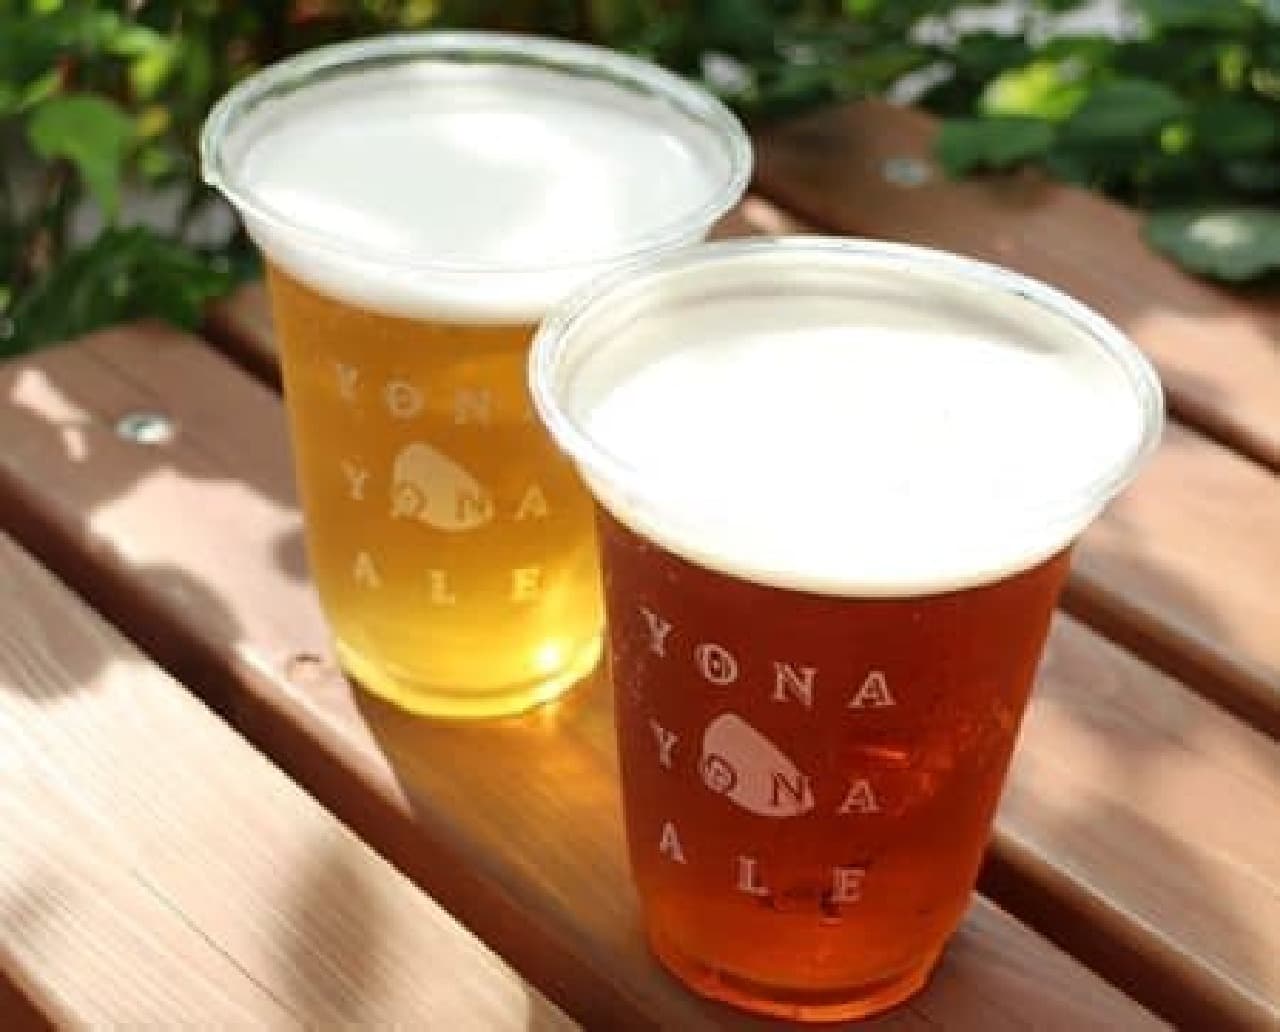 Cheers in the summer with Yona Yona ale!